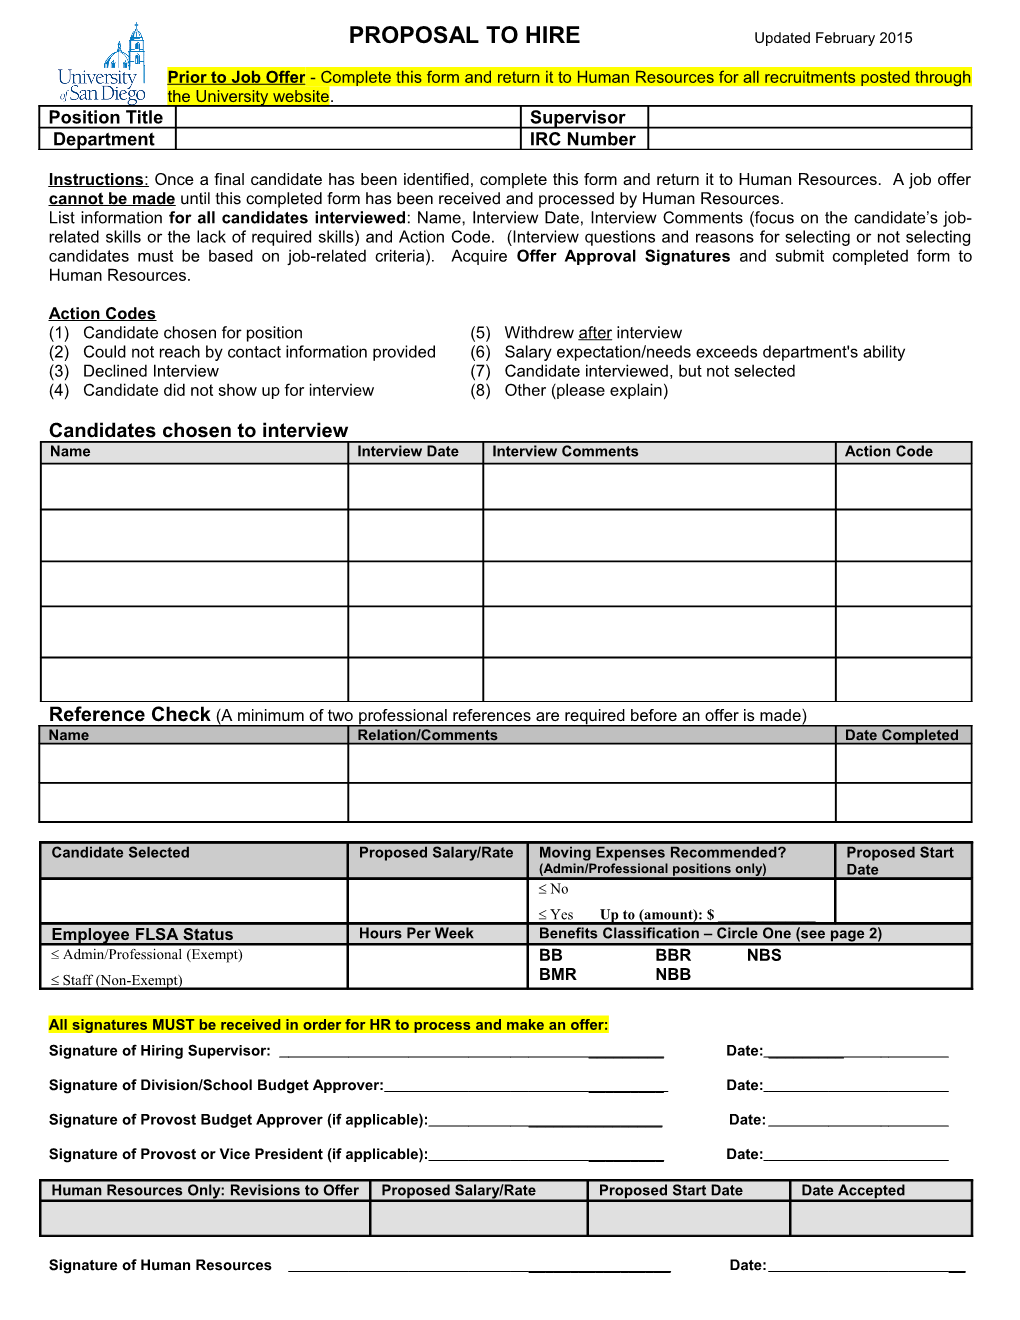 Prior to Job Offer - Complete This Form and Return It to Human Resources for All Recruitments